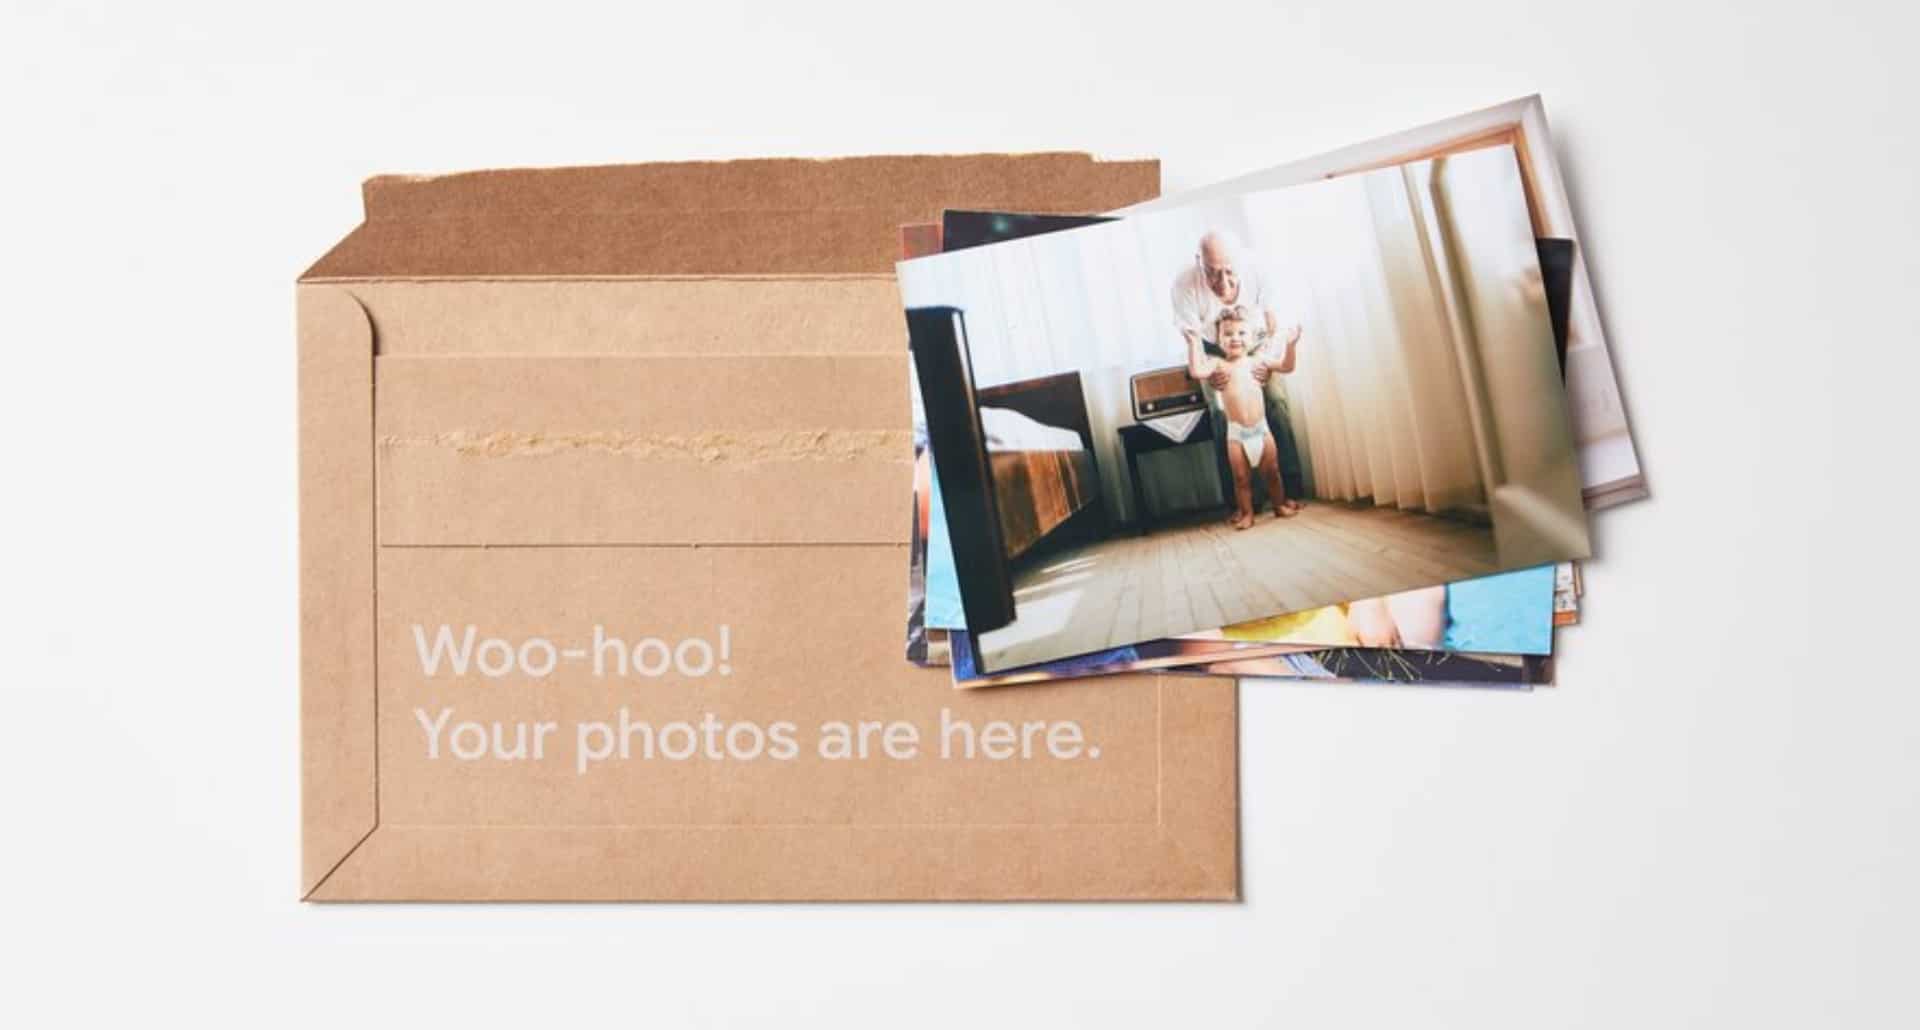 Google Photos Starts its Monthly Photo Printing and Delivery Service